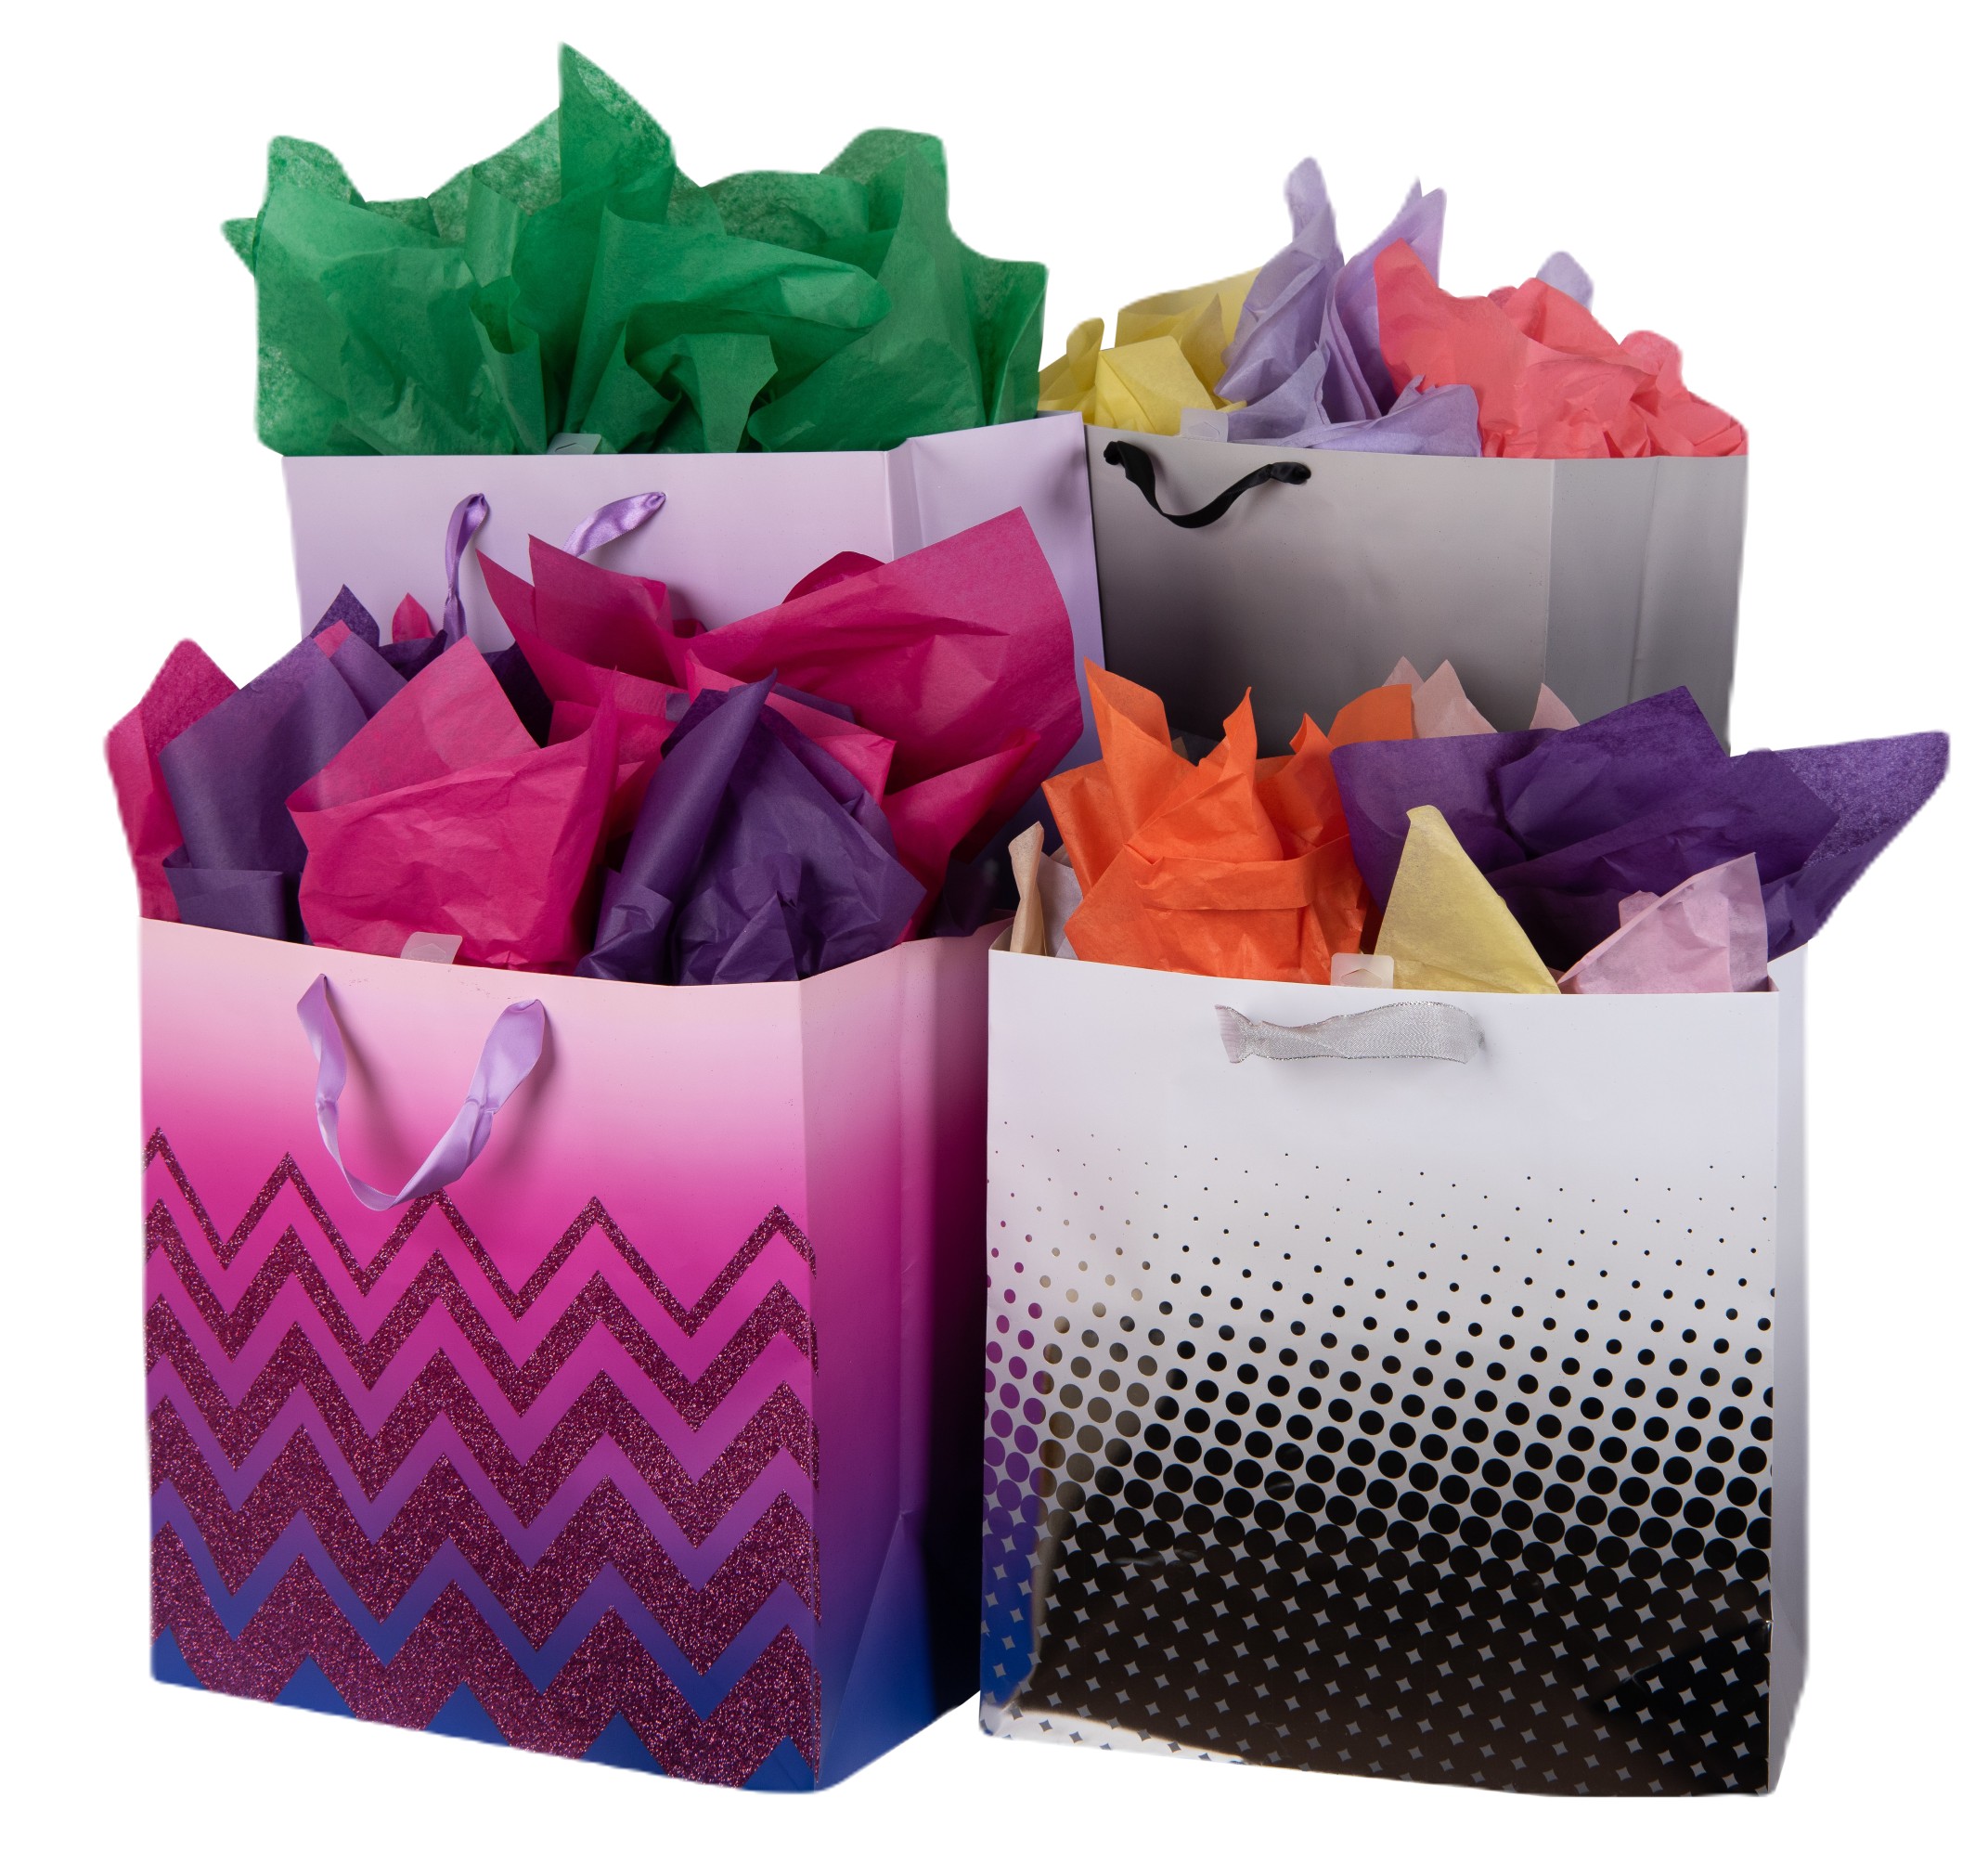 Hot Pink Tissue Paper Squares, Bulk 24 Sheets, Presents by Feronia